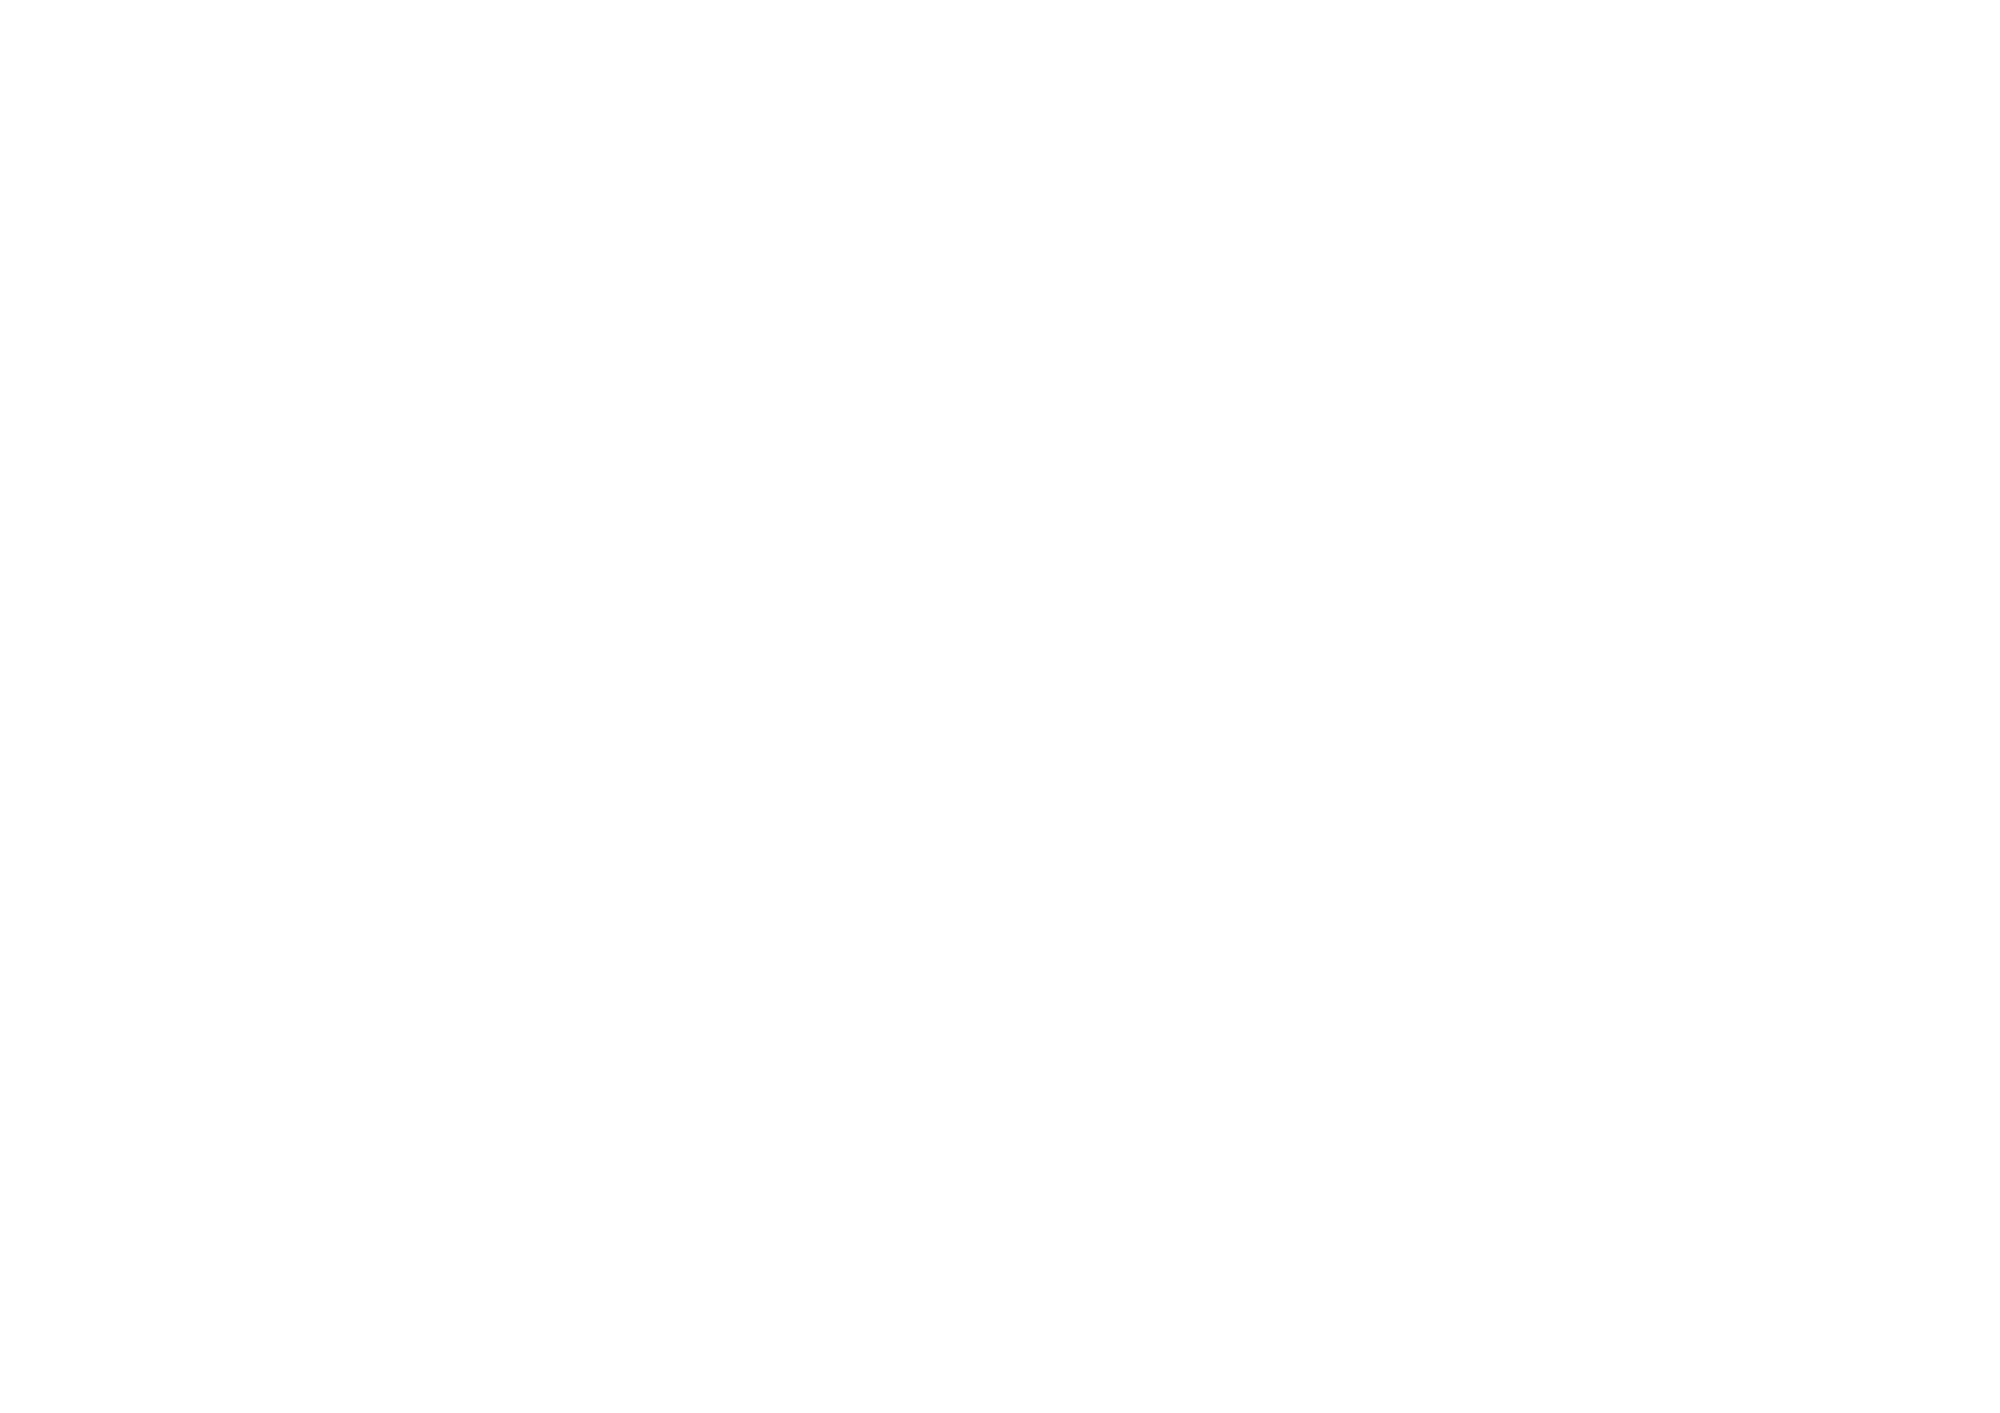 Zoso Logo - ZosoThe Groove Music Hall